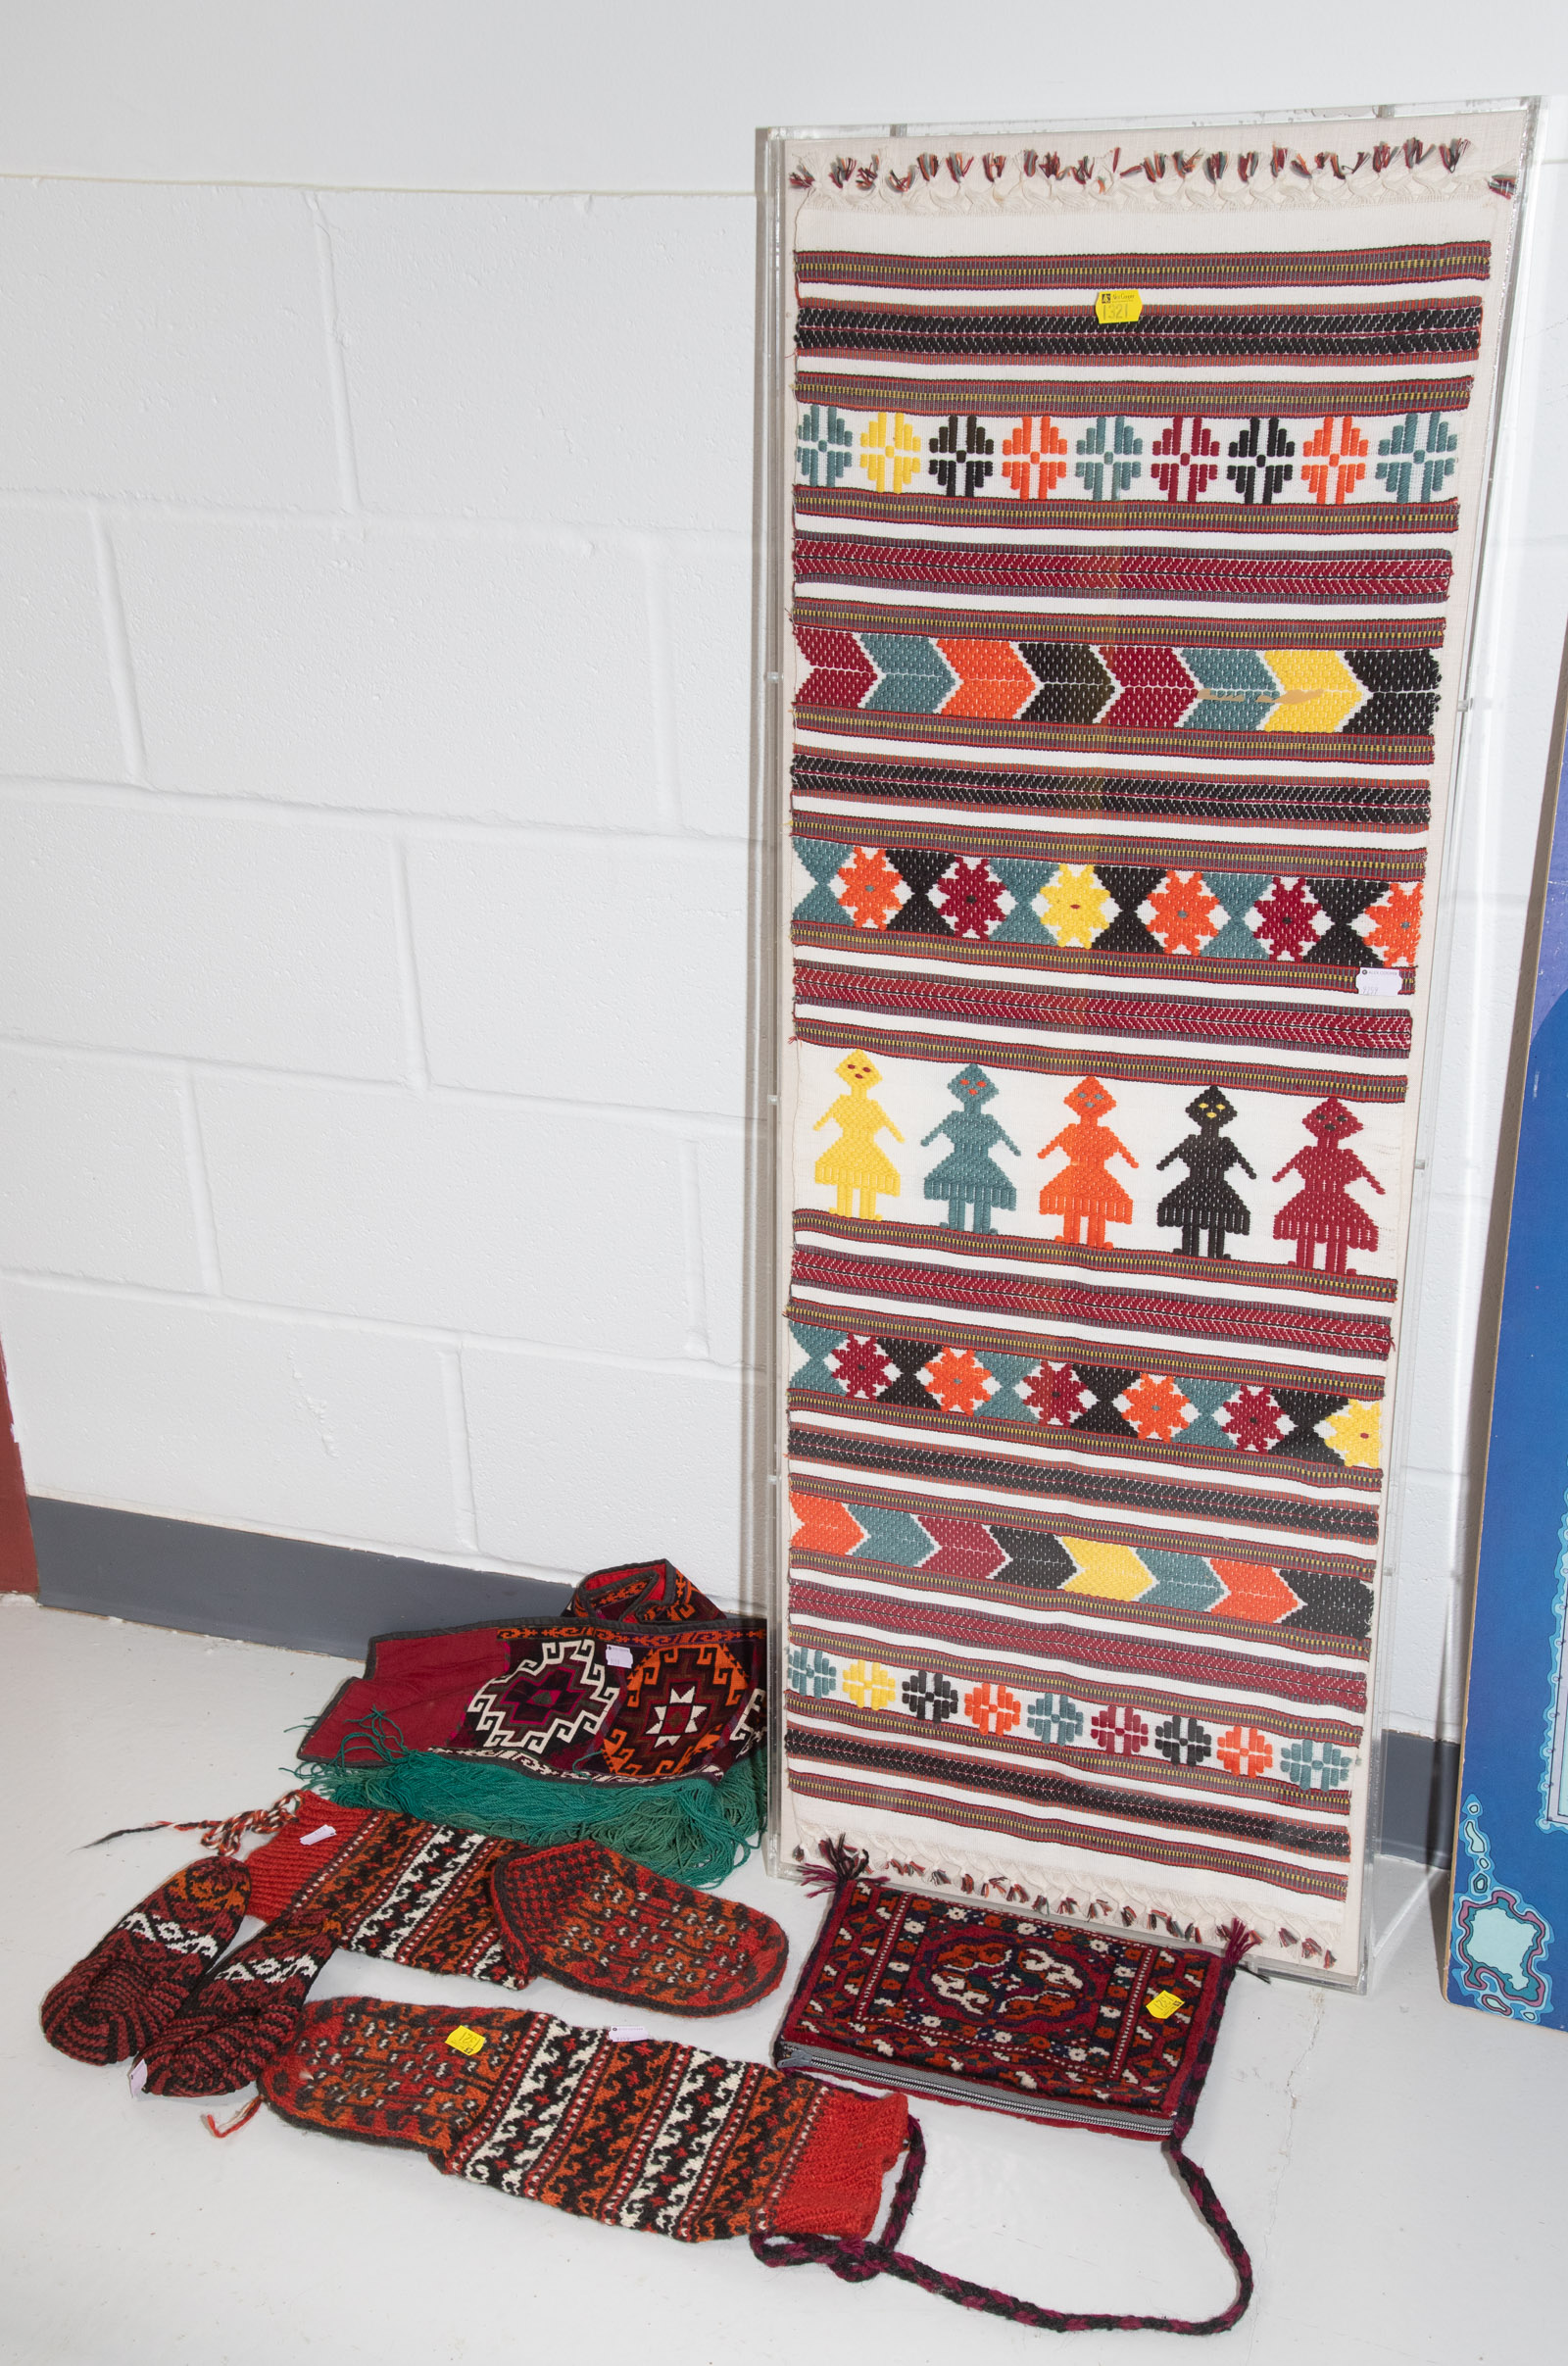 SELECTION OF TURKOMAN & OTHER TEXTILES